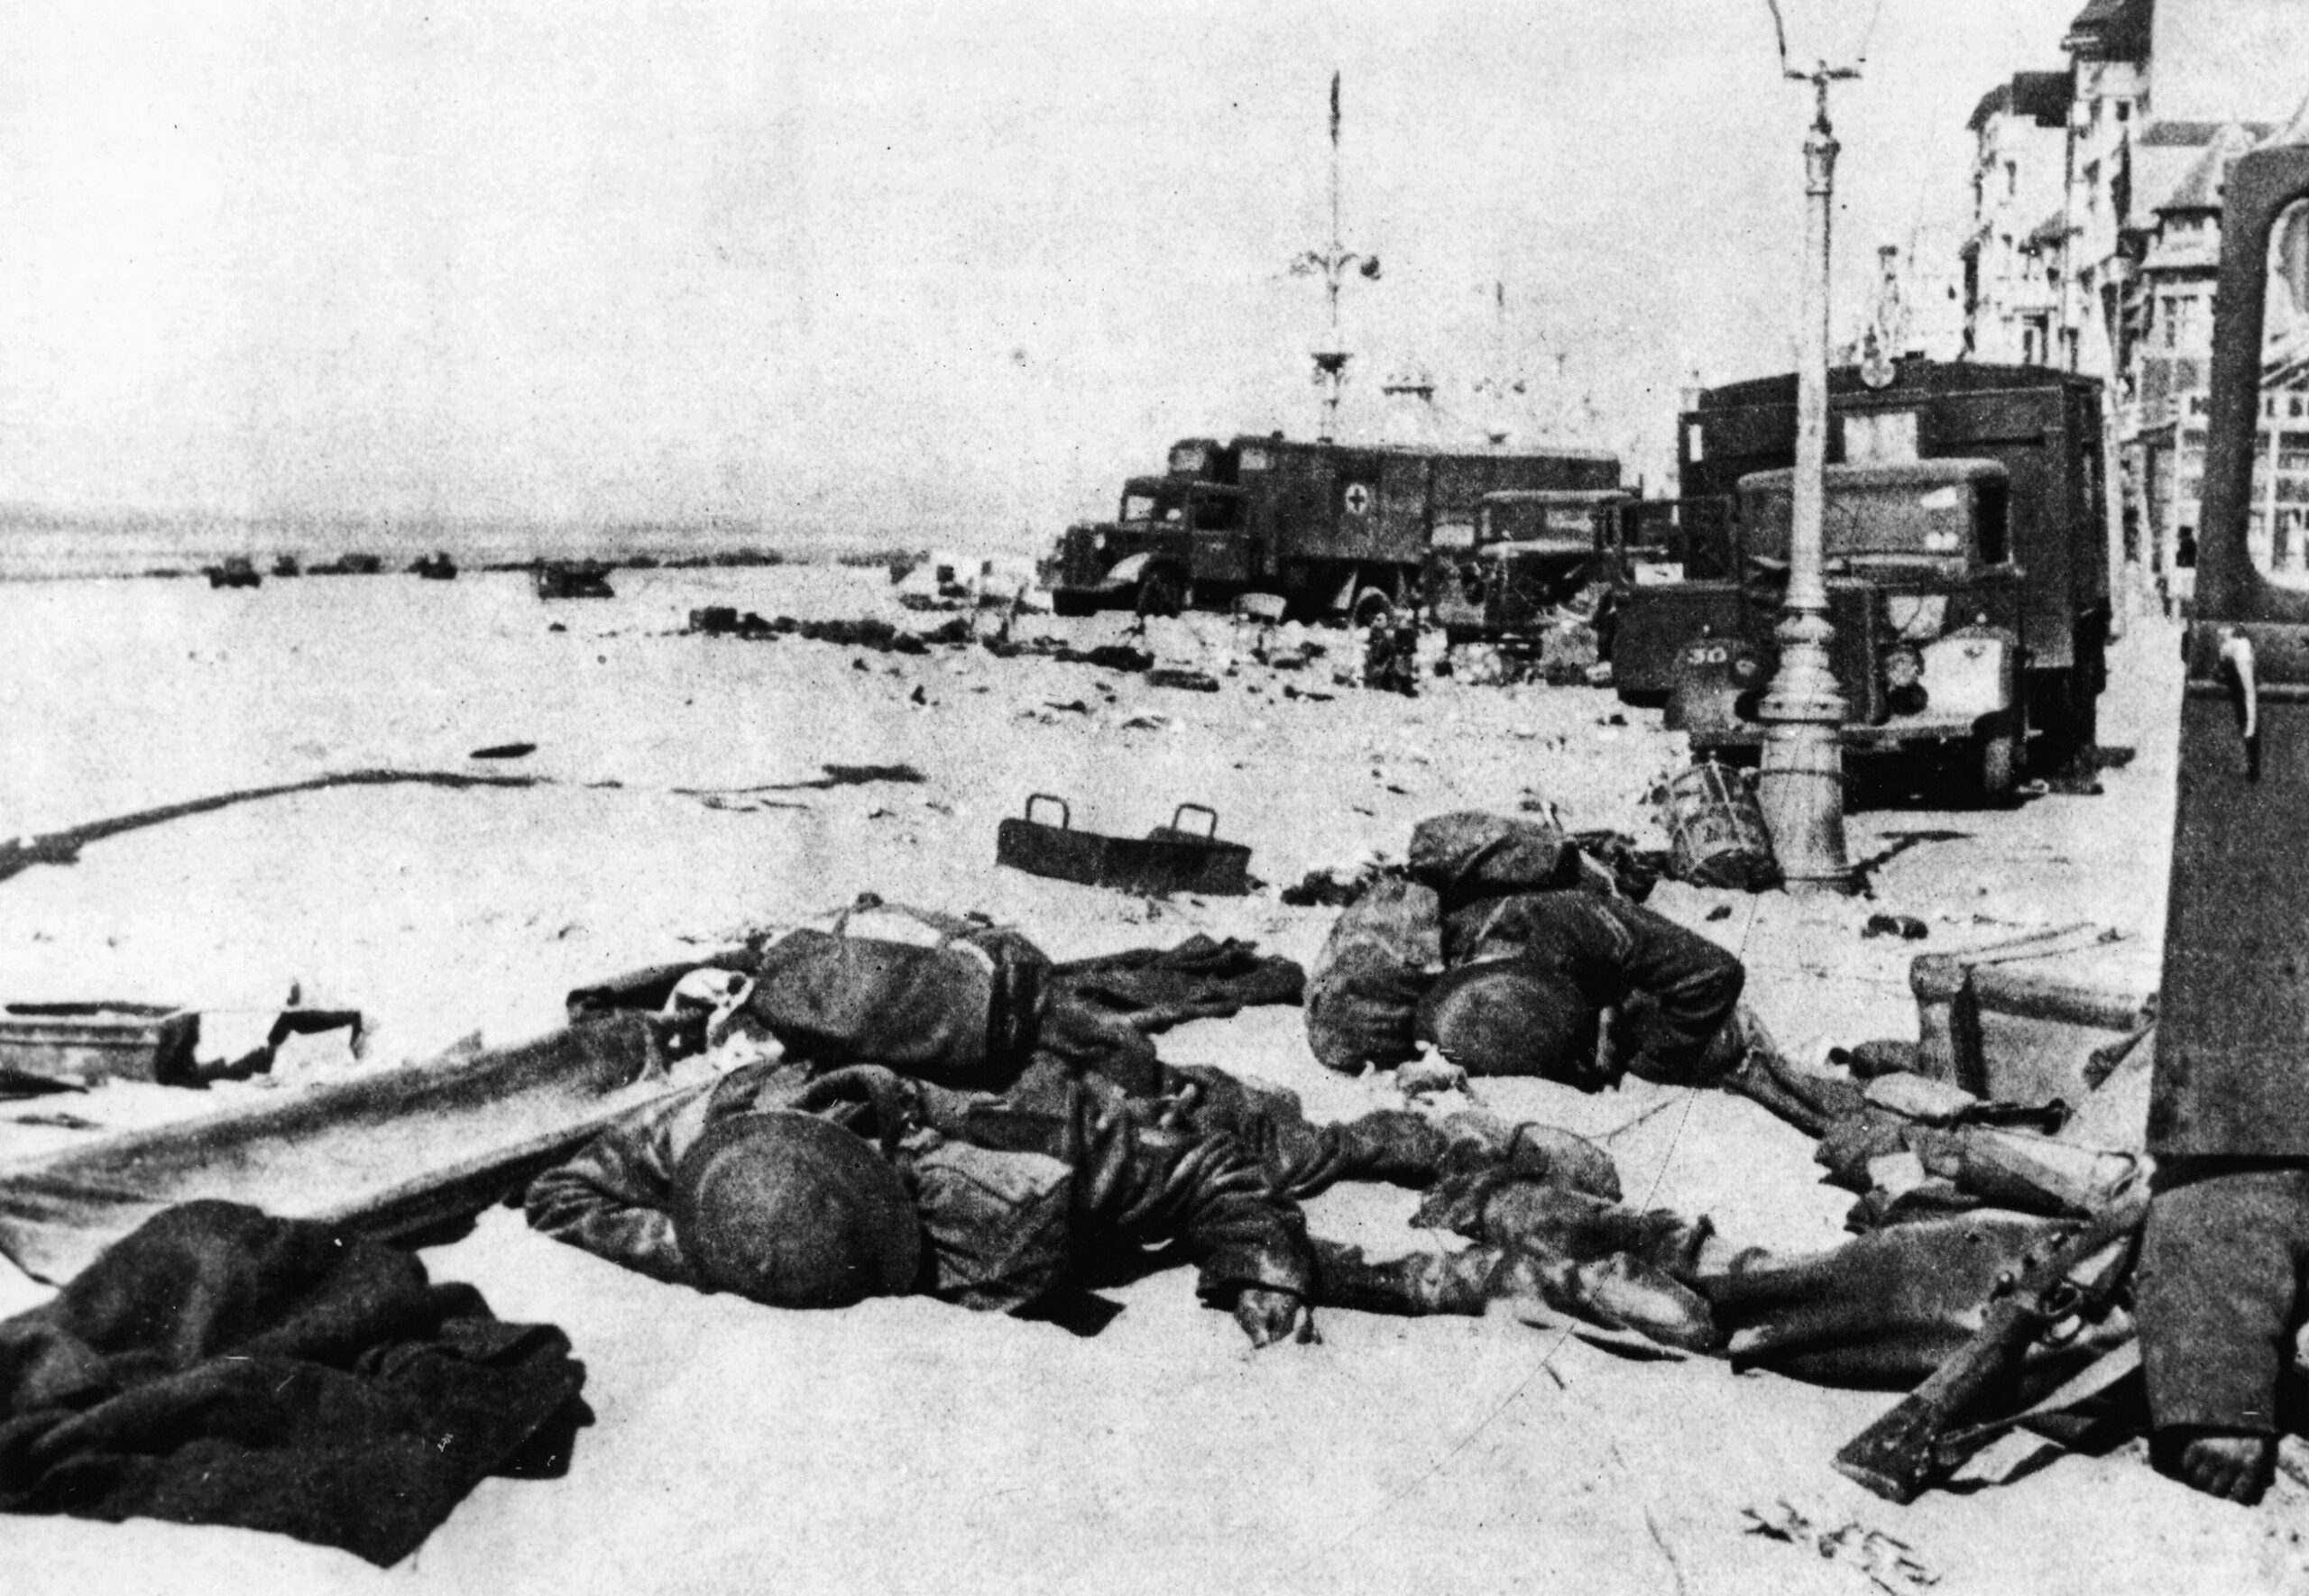 The bodies of two British soldiers, who were not as fortunate as many of their comrades, lie unburied amid abandoned equipment on the beach at Dunkirk. 